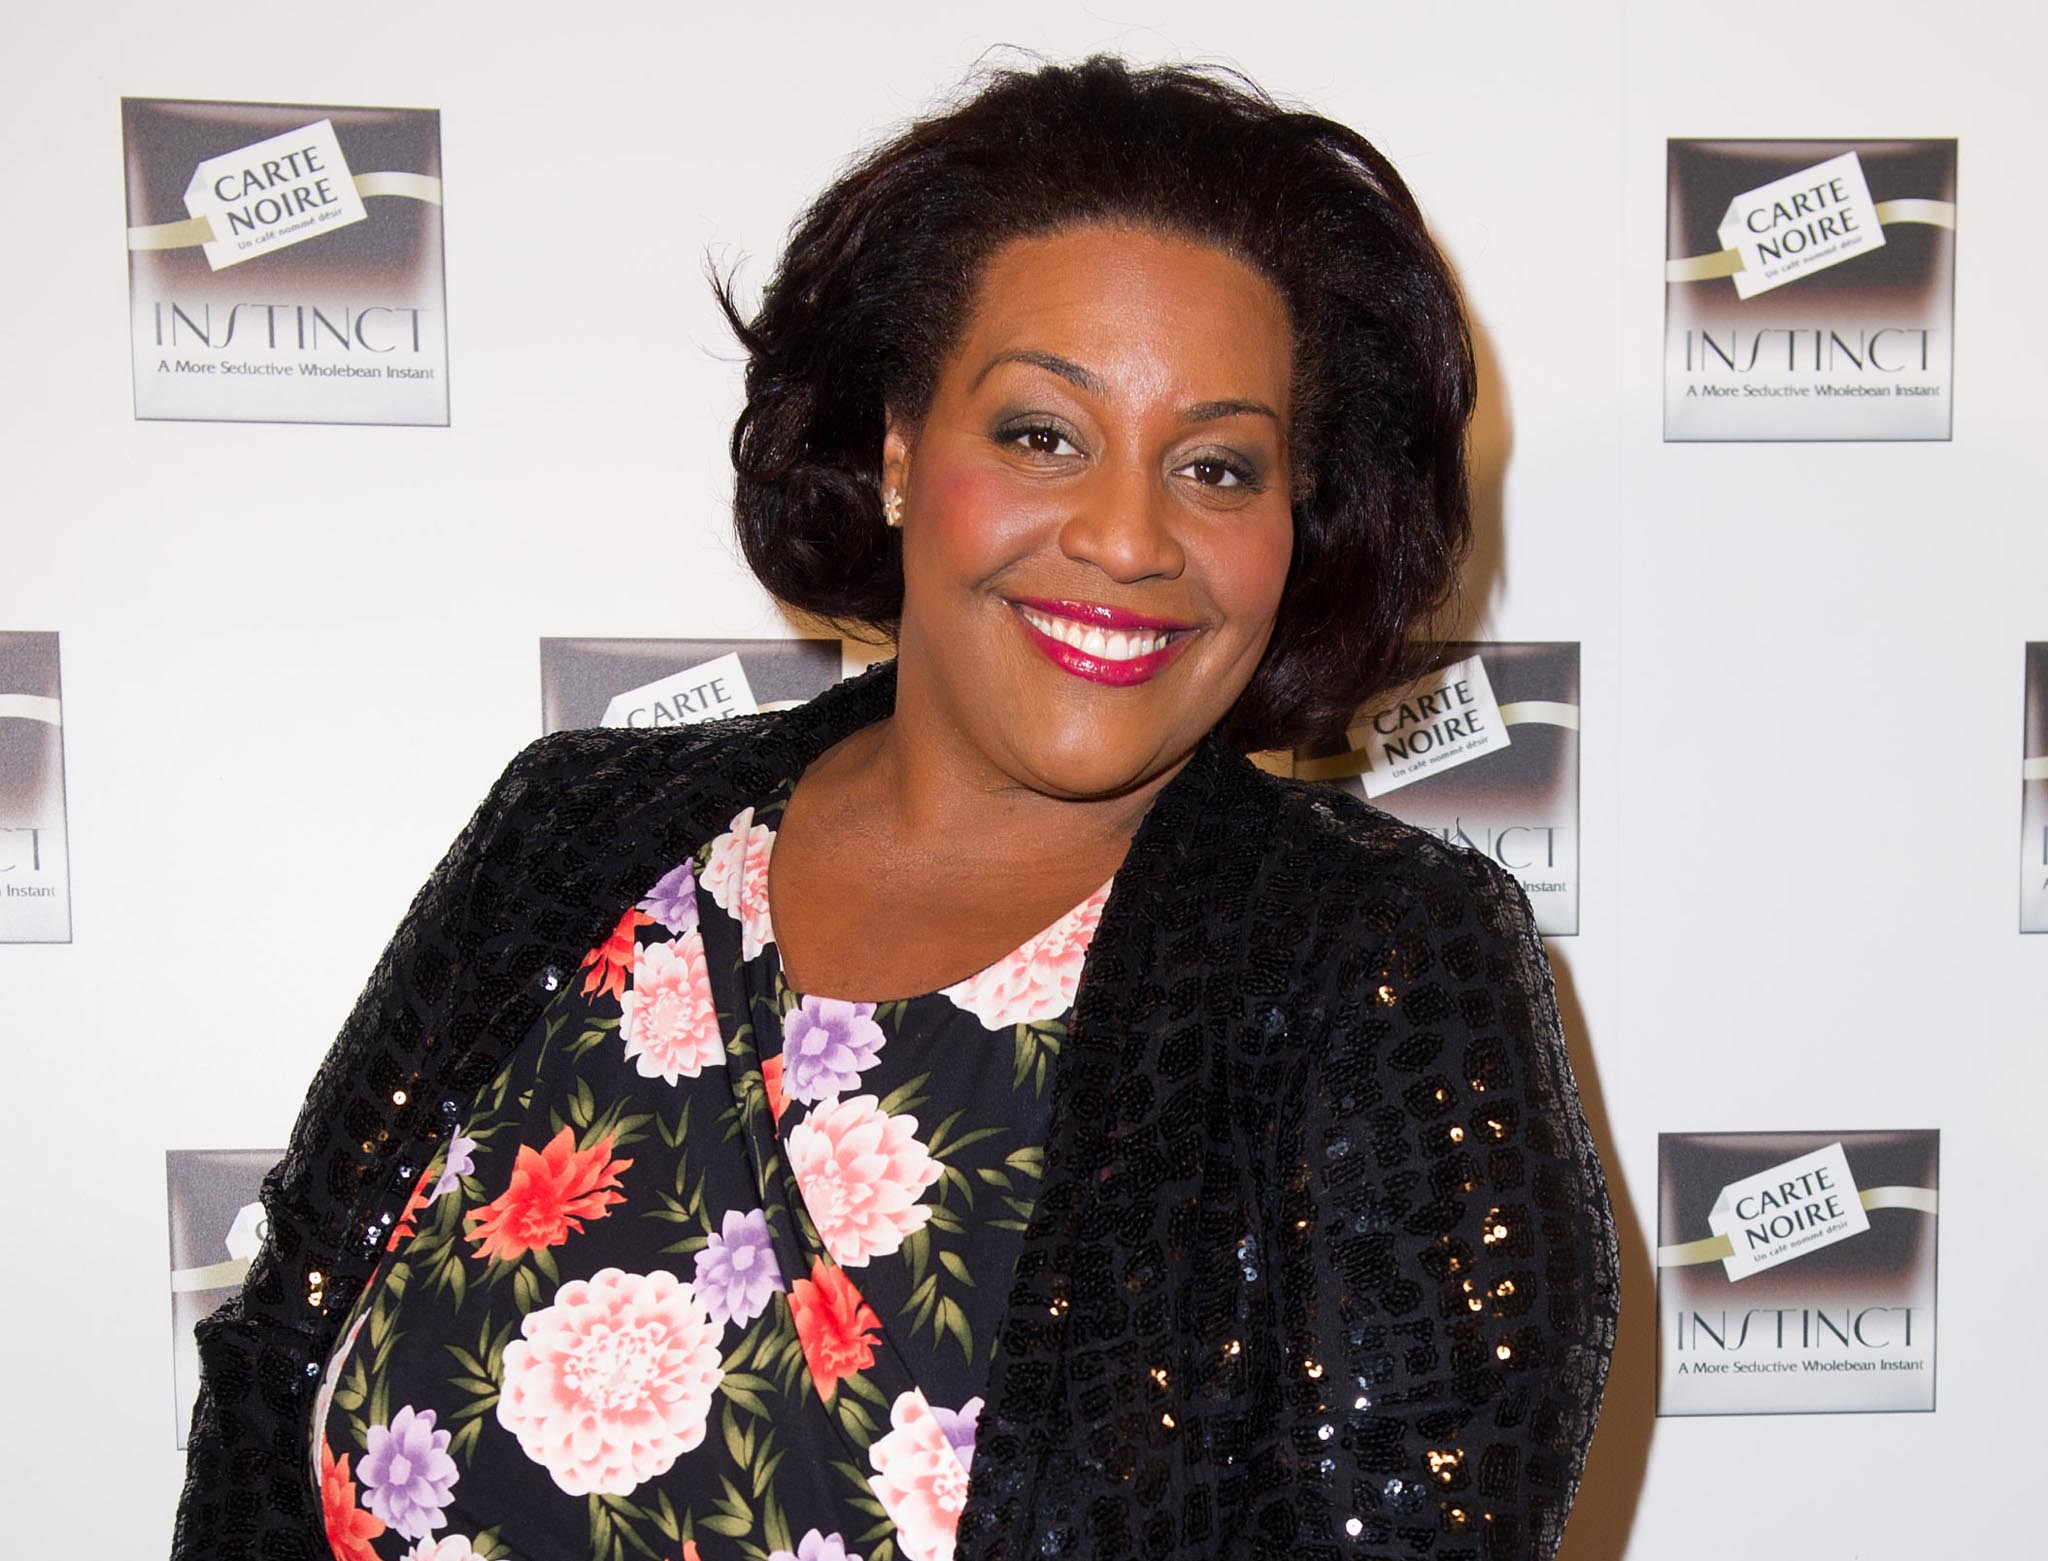 Reality TV star and former Big Brother contestant Alison Hammond